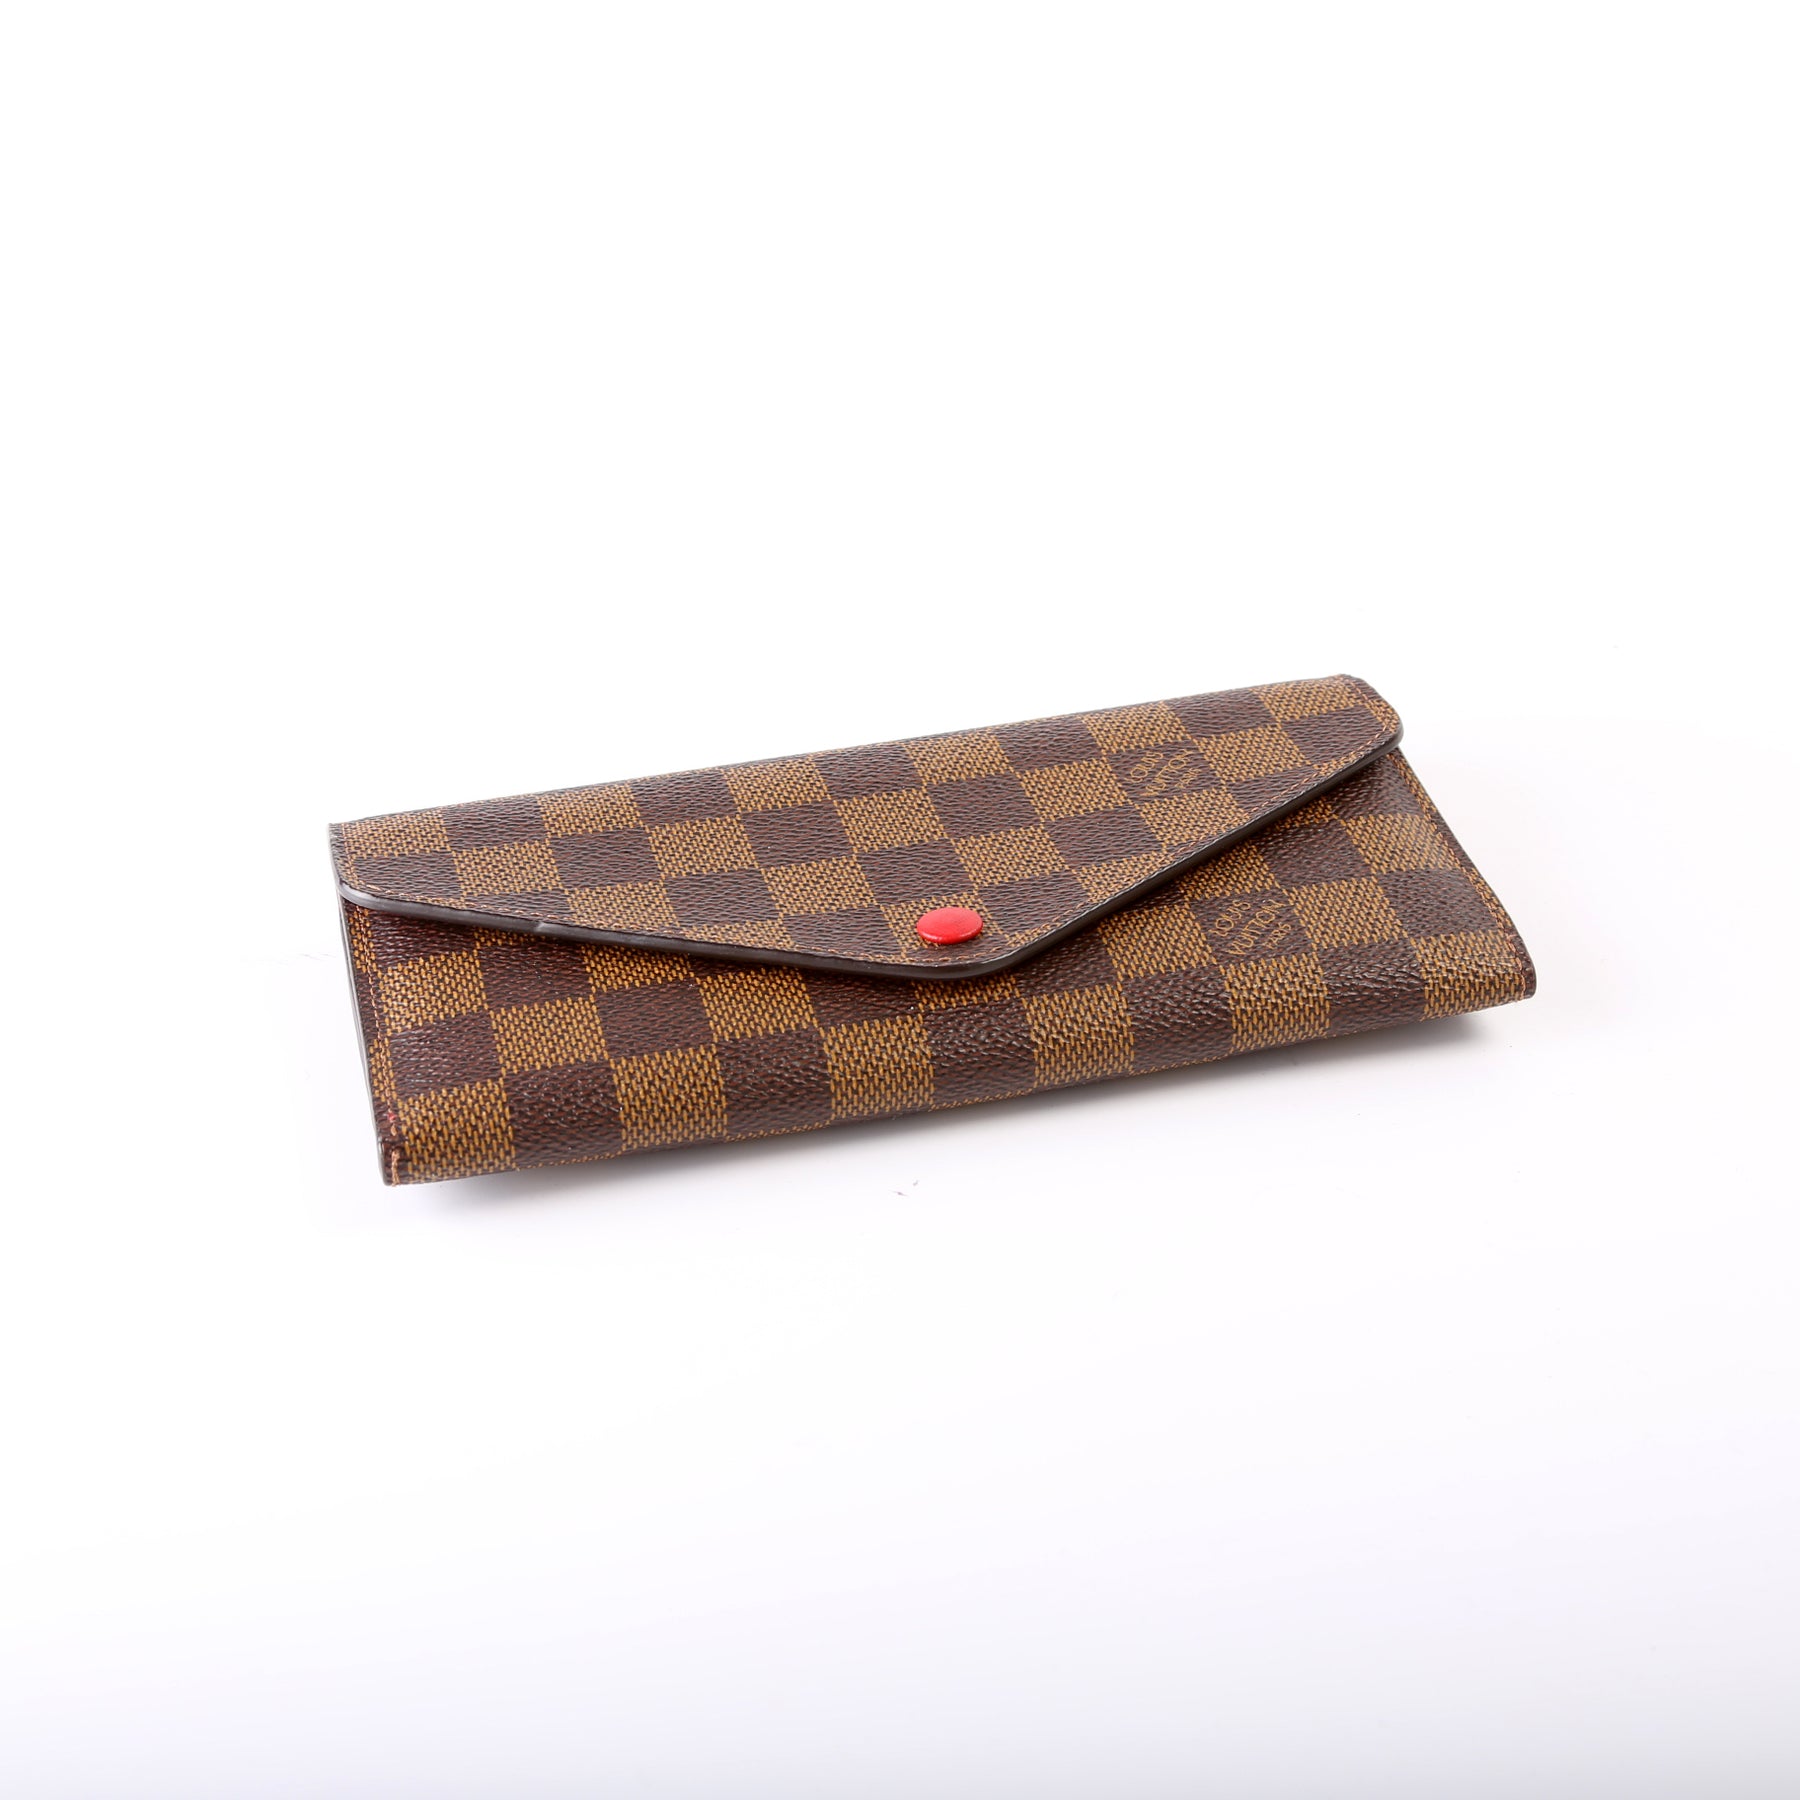 Louis Vuitton Josephine Wallet Damier Ebene Red Lining in Coated